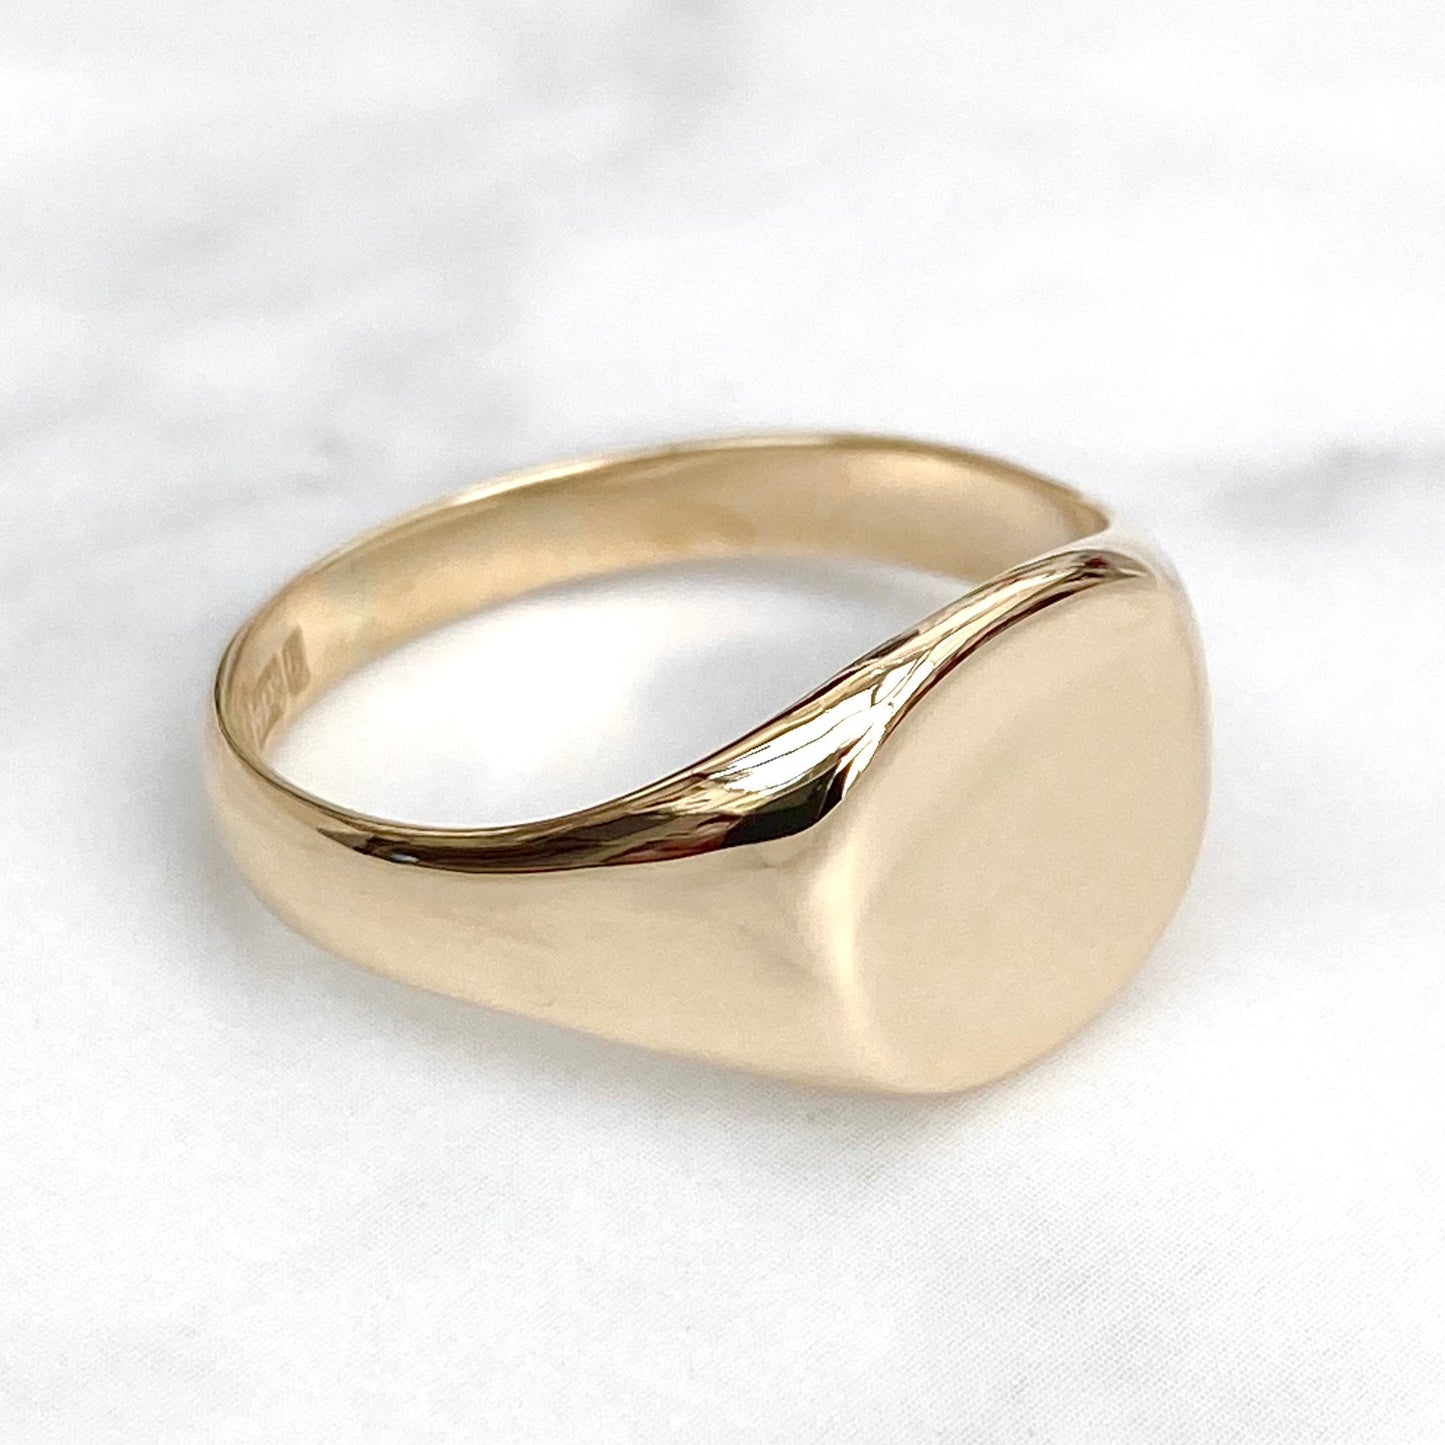 Vintage 9ct yellow gold cushion signet ring - 9k gold - Can be hand engraved - UK size V - US size 10 1/2 - British vintage jewellery